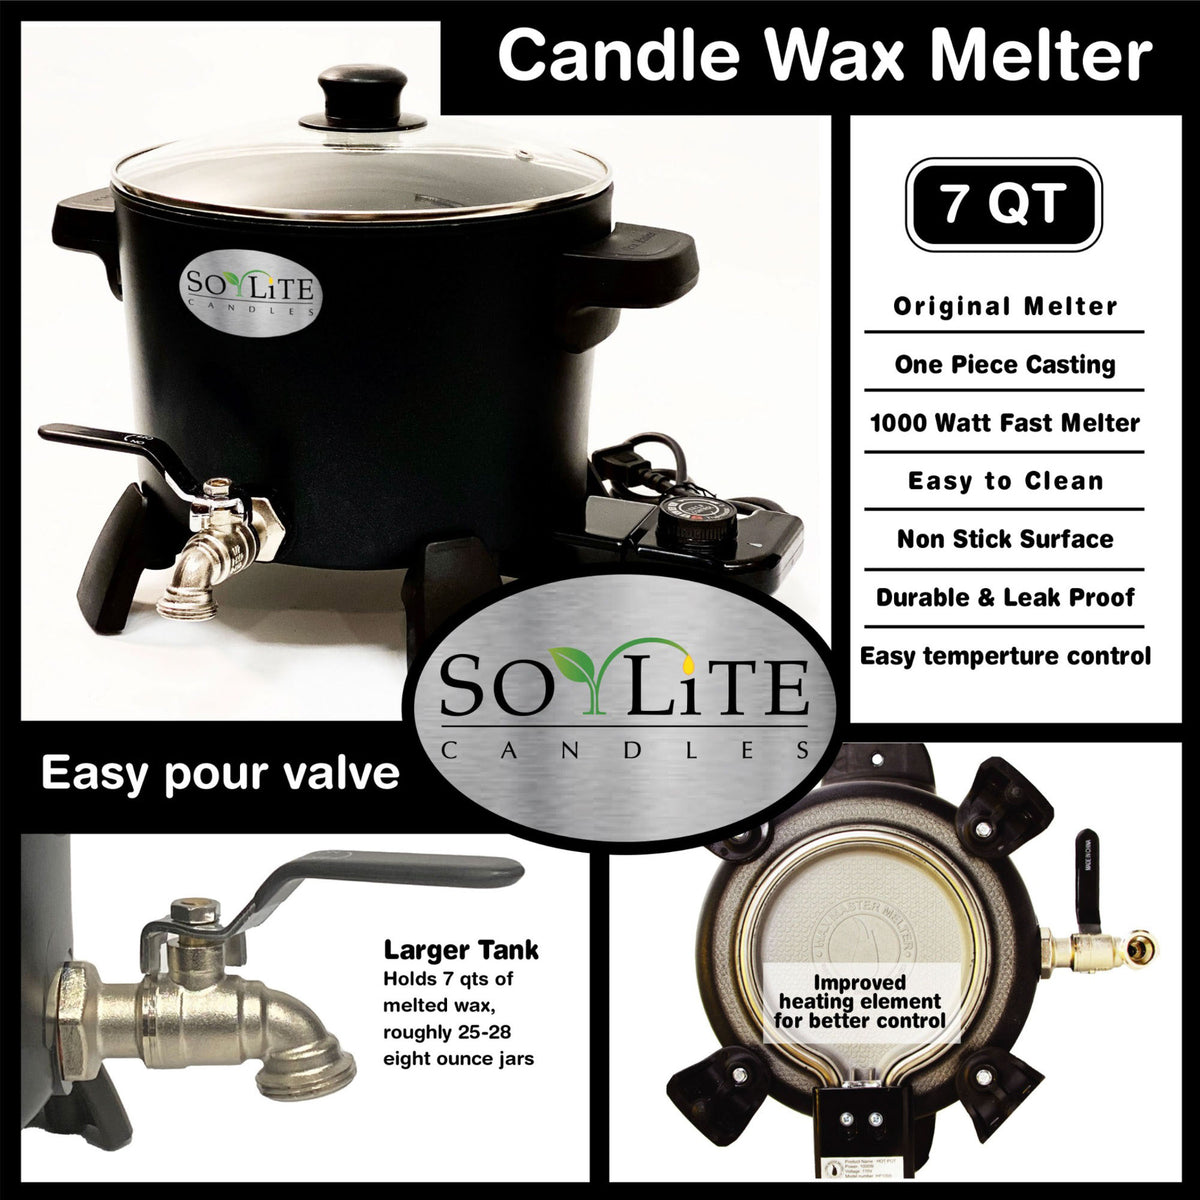  Candle Making Pot - The Original Black Candle Pouring and Wax  Melting Pot. Perfect as Double Boiler for Candle Making. Sturdy Metal  Candle Wax Melter Pitcher Built to Last.